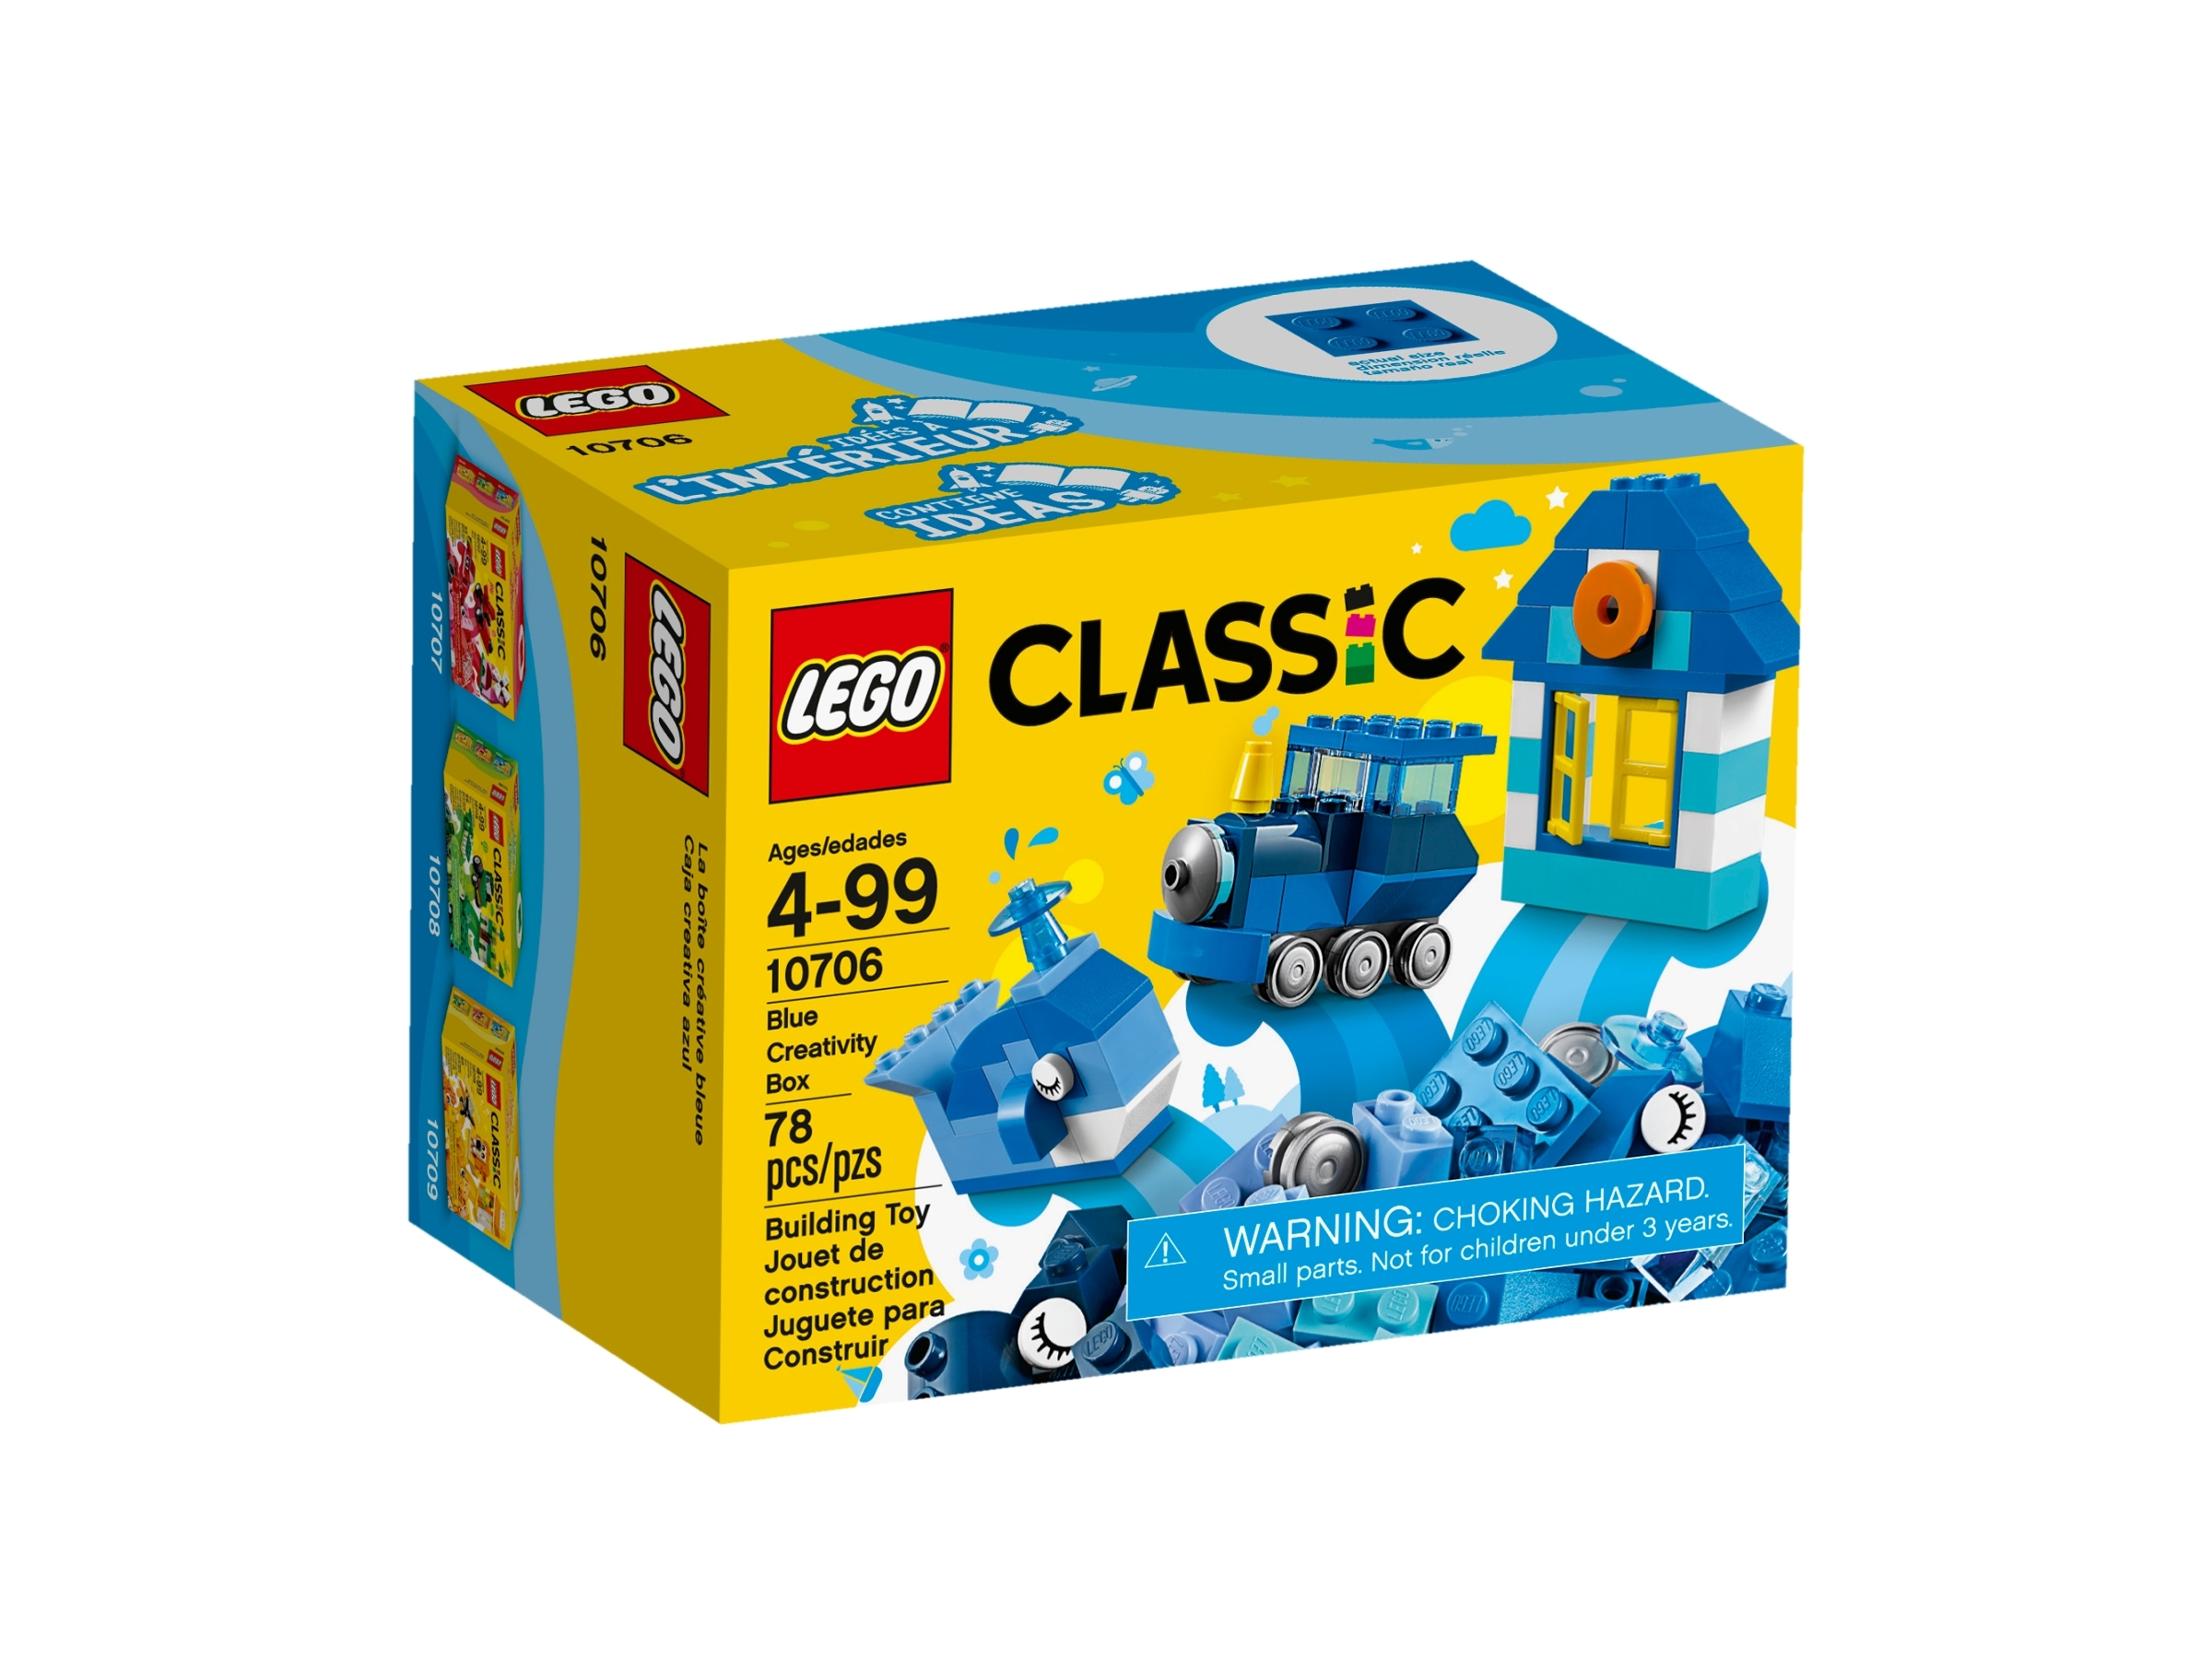 Blue Creativity Box 10706 | Classic Buy online at the Official LEGO® Shop US